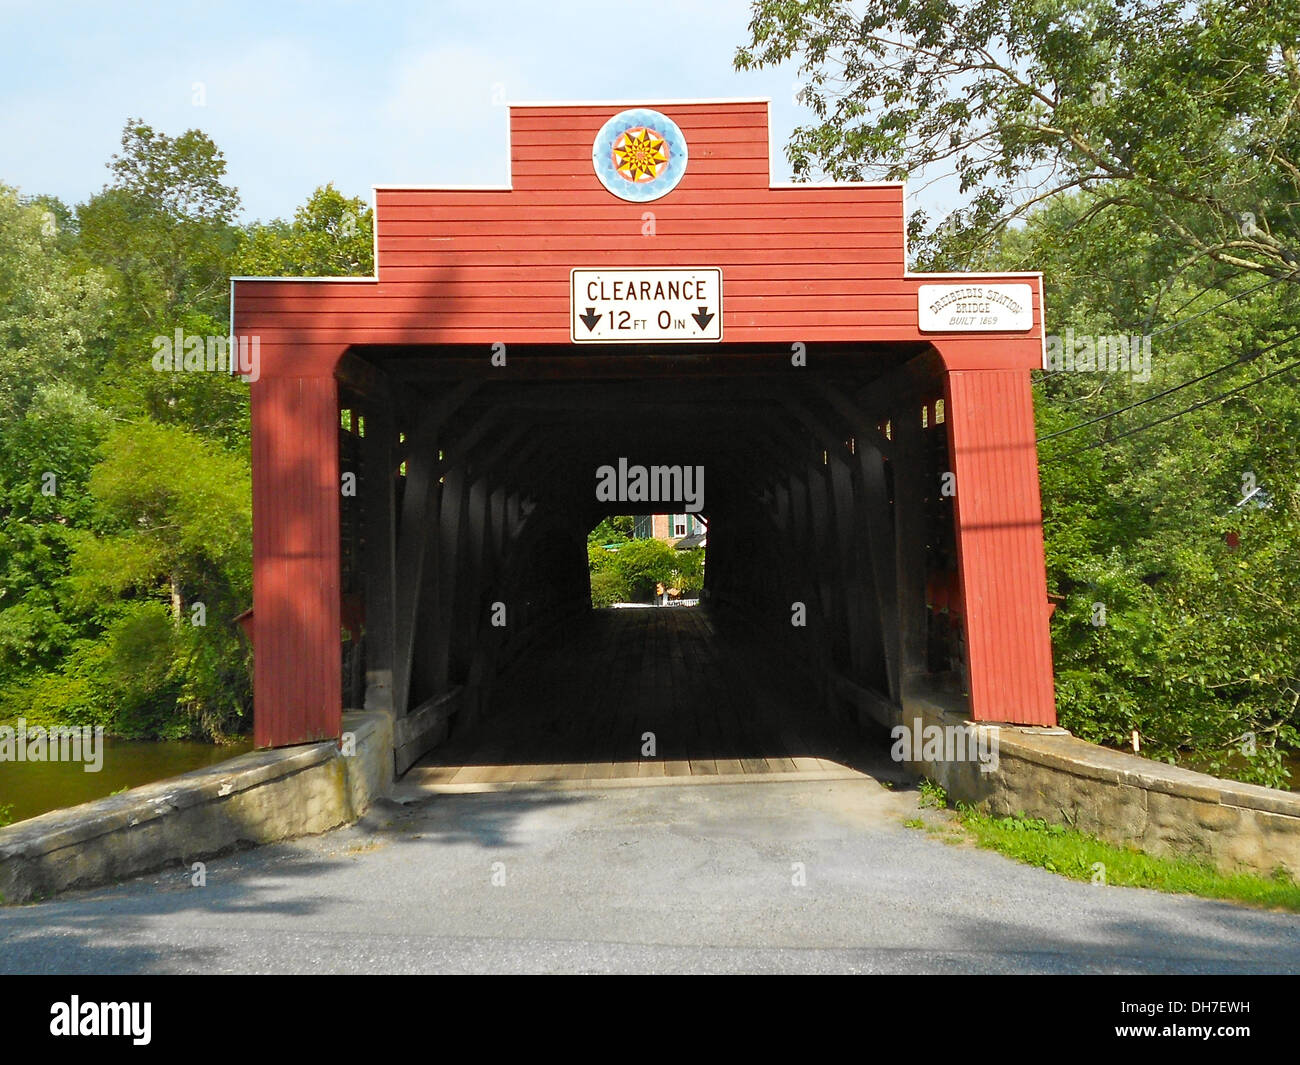 West entrance to the Dreibelbis Station Bridge, listed on the NRHP on February 23, 1981. Located south of Lenhartsville on Towns Stock Photo